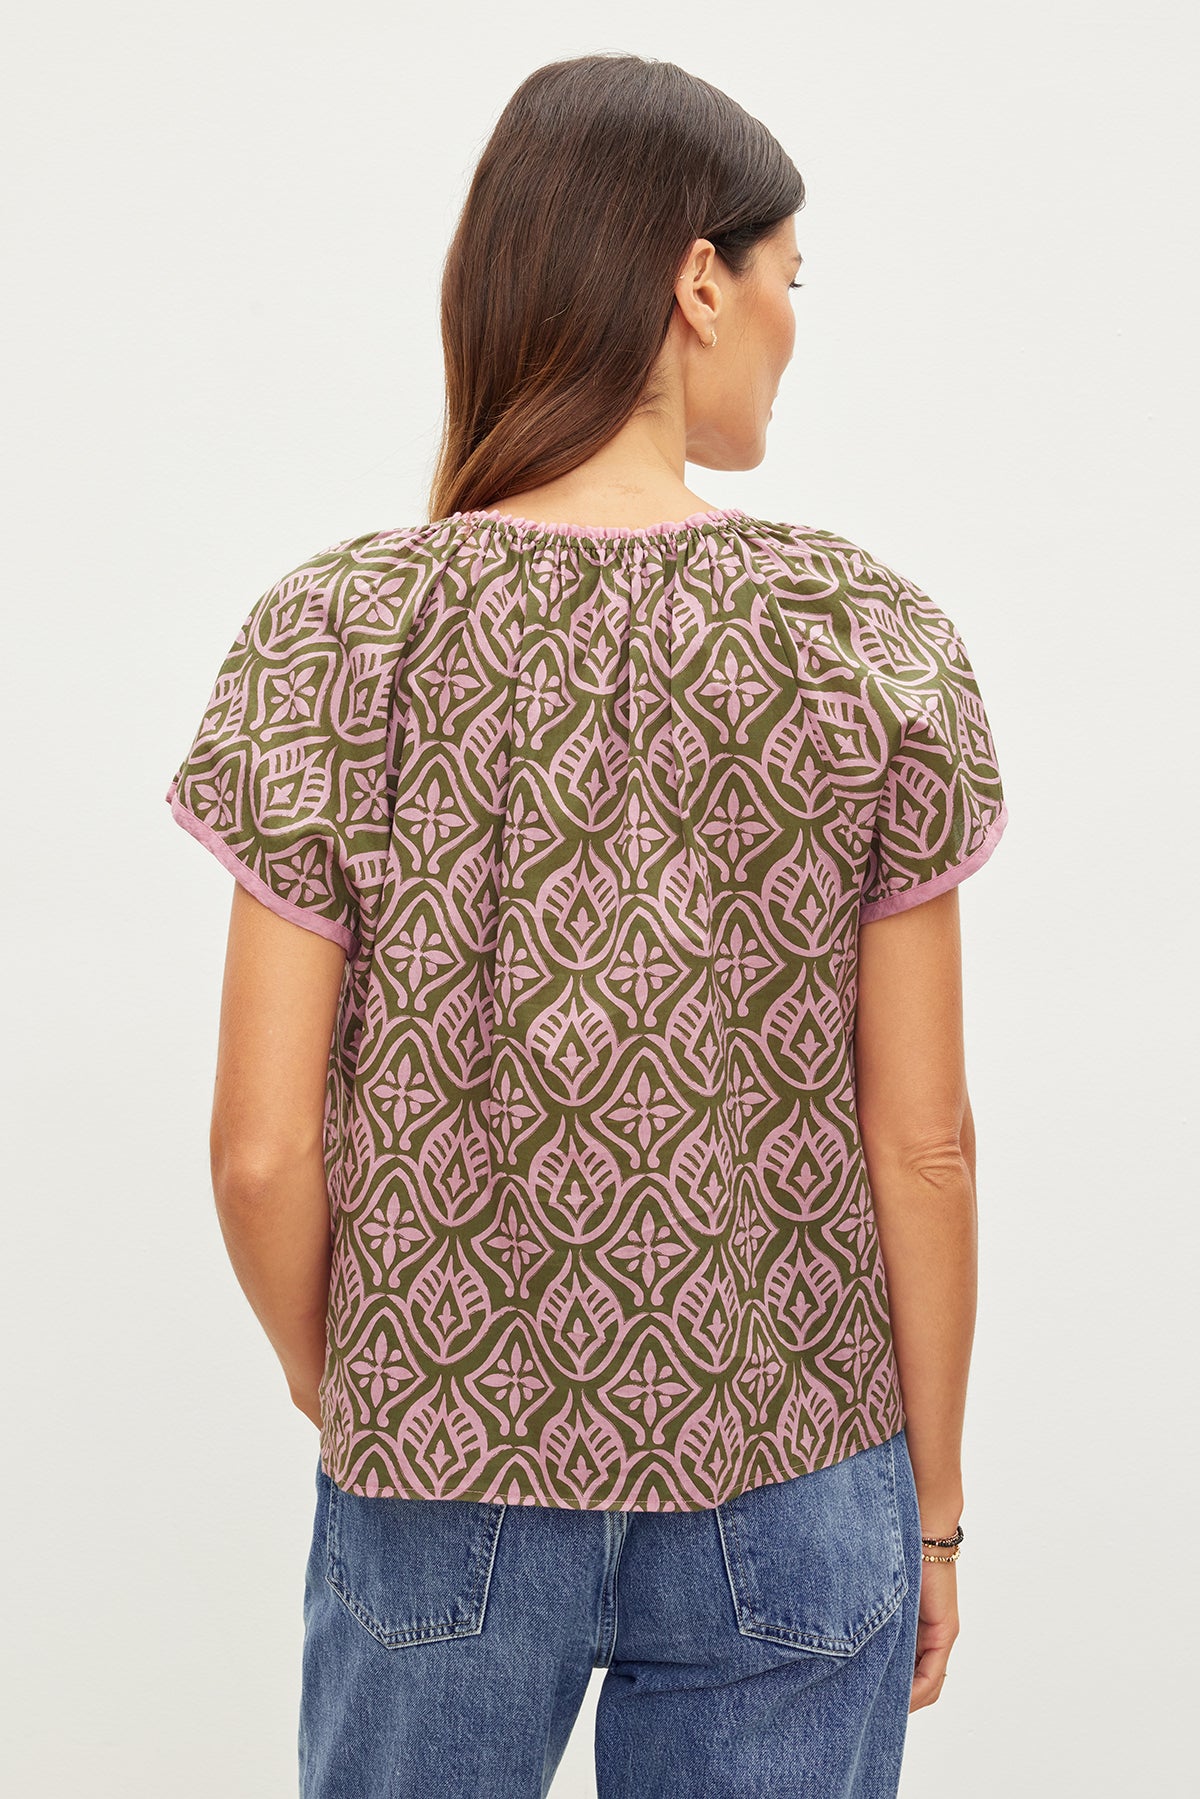 The back view of a woman wearing an IDA printed boho top by Velvet by Graham & Spencer, with raglan short sleeves and ruffle detail.-35967654297793